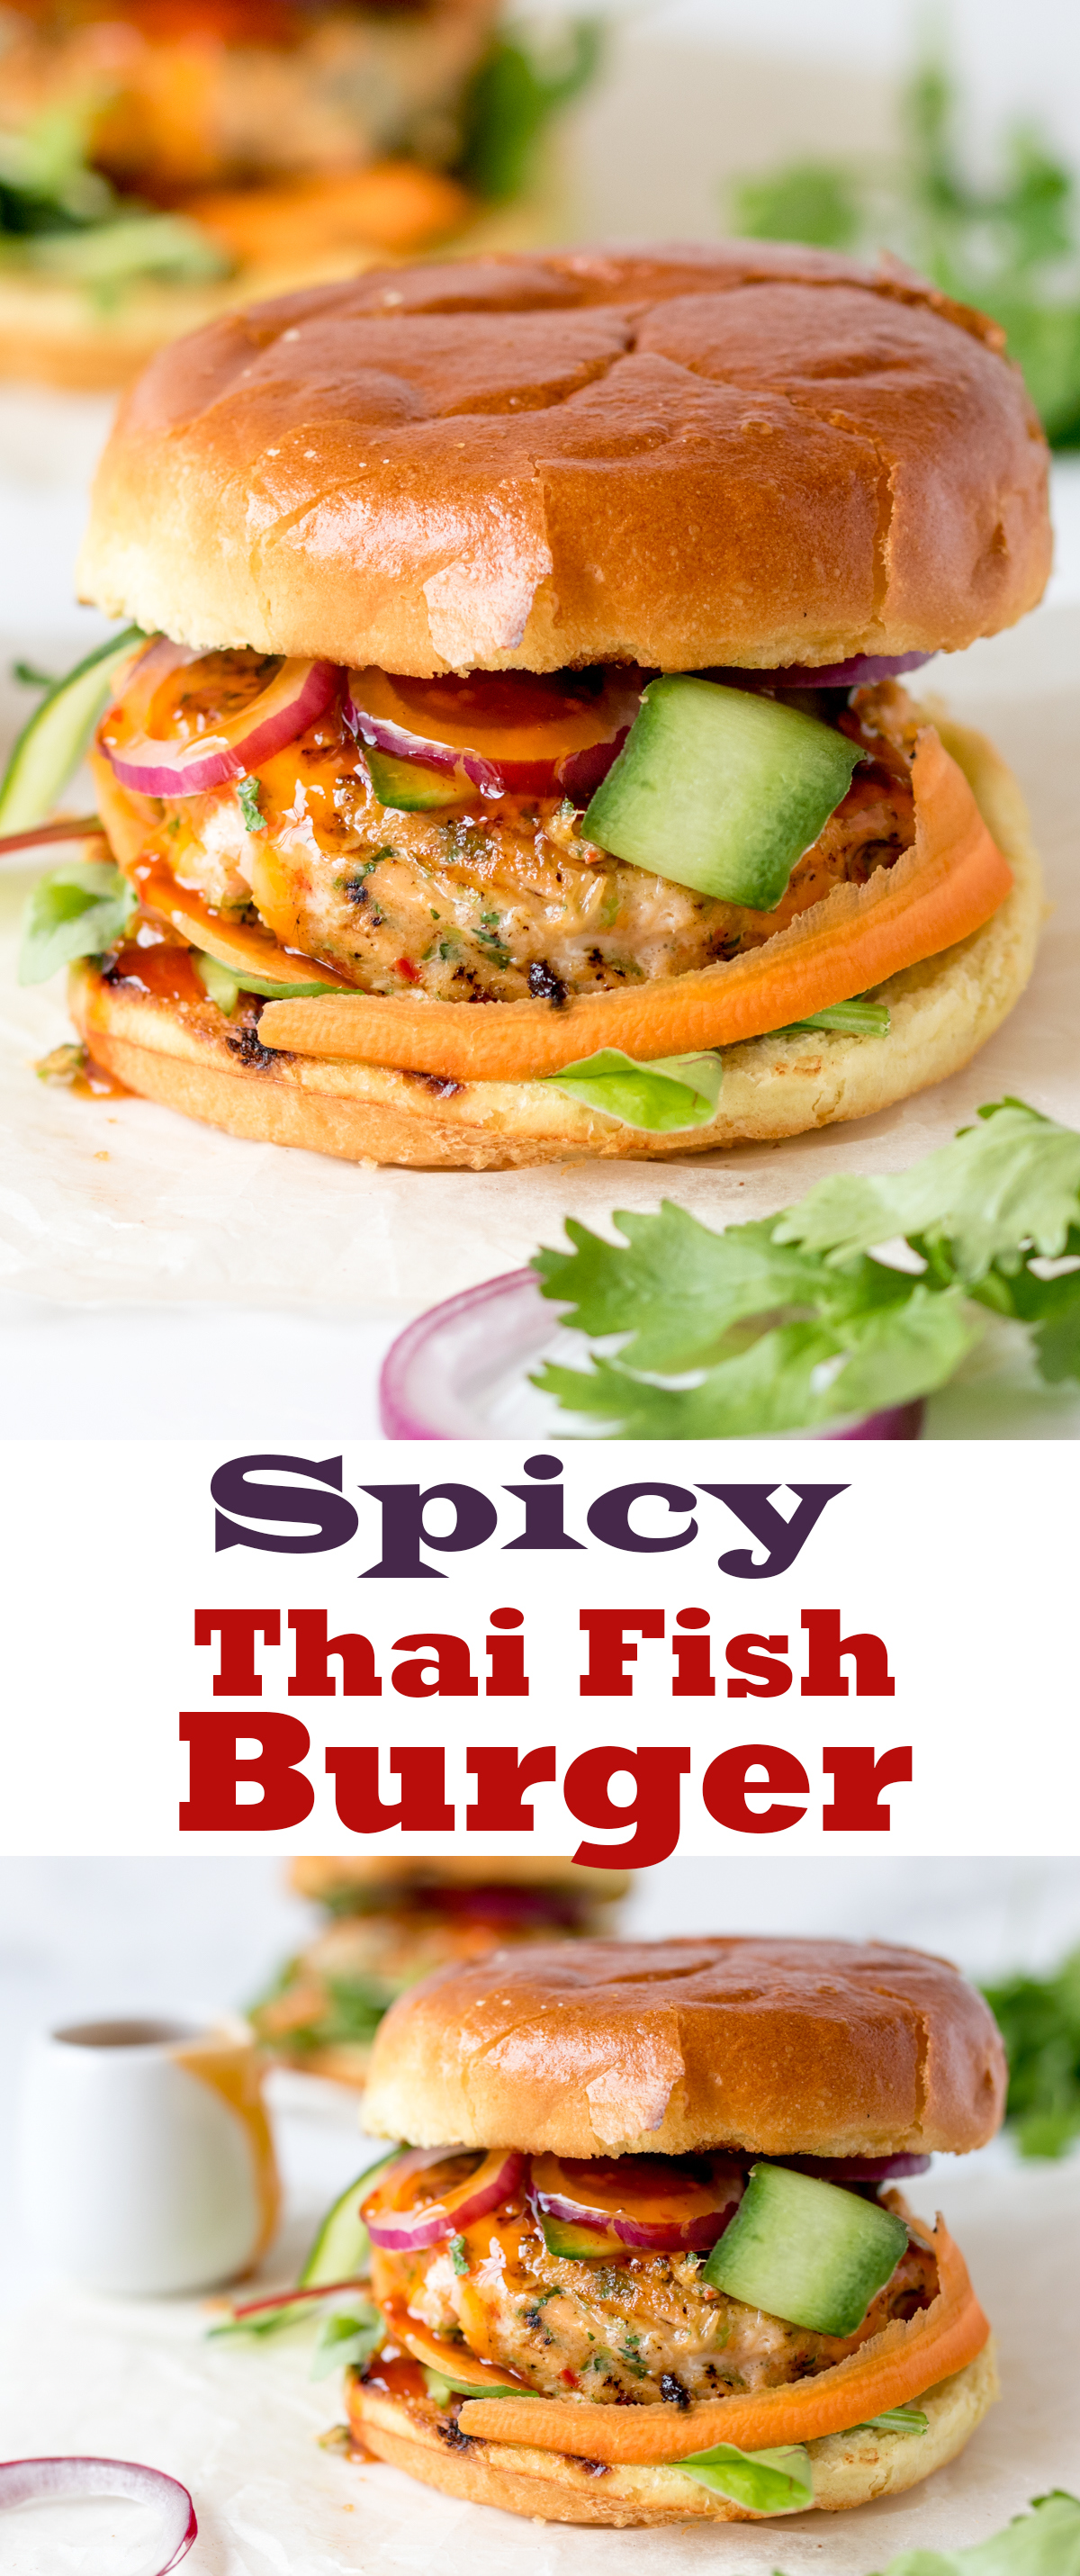 These spicy Thai fish burgers are bursting with flavor. So easy to prepare too!